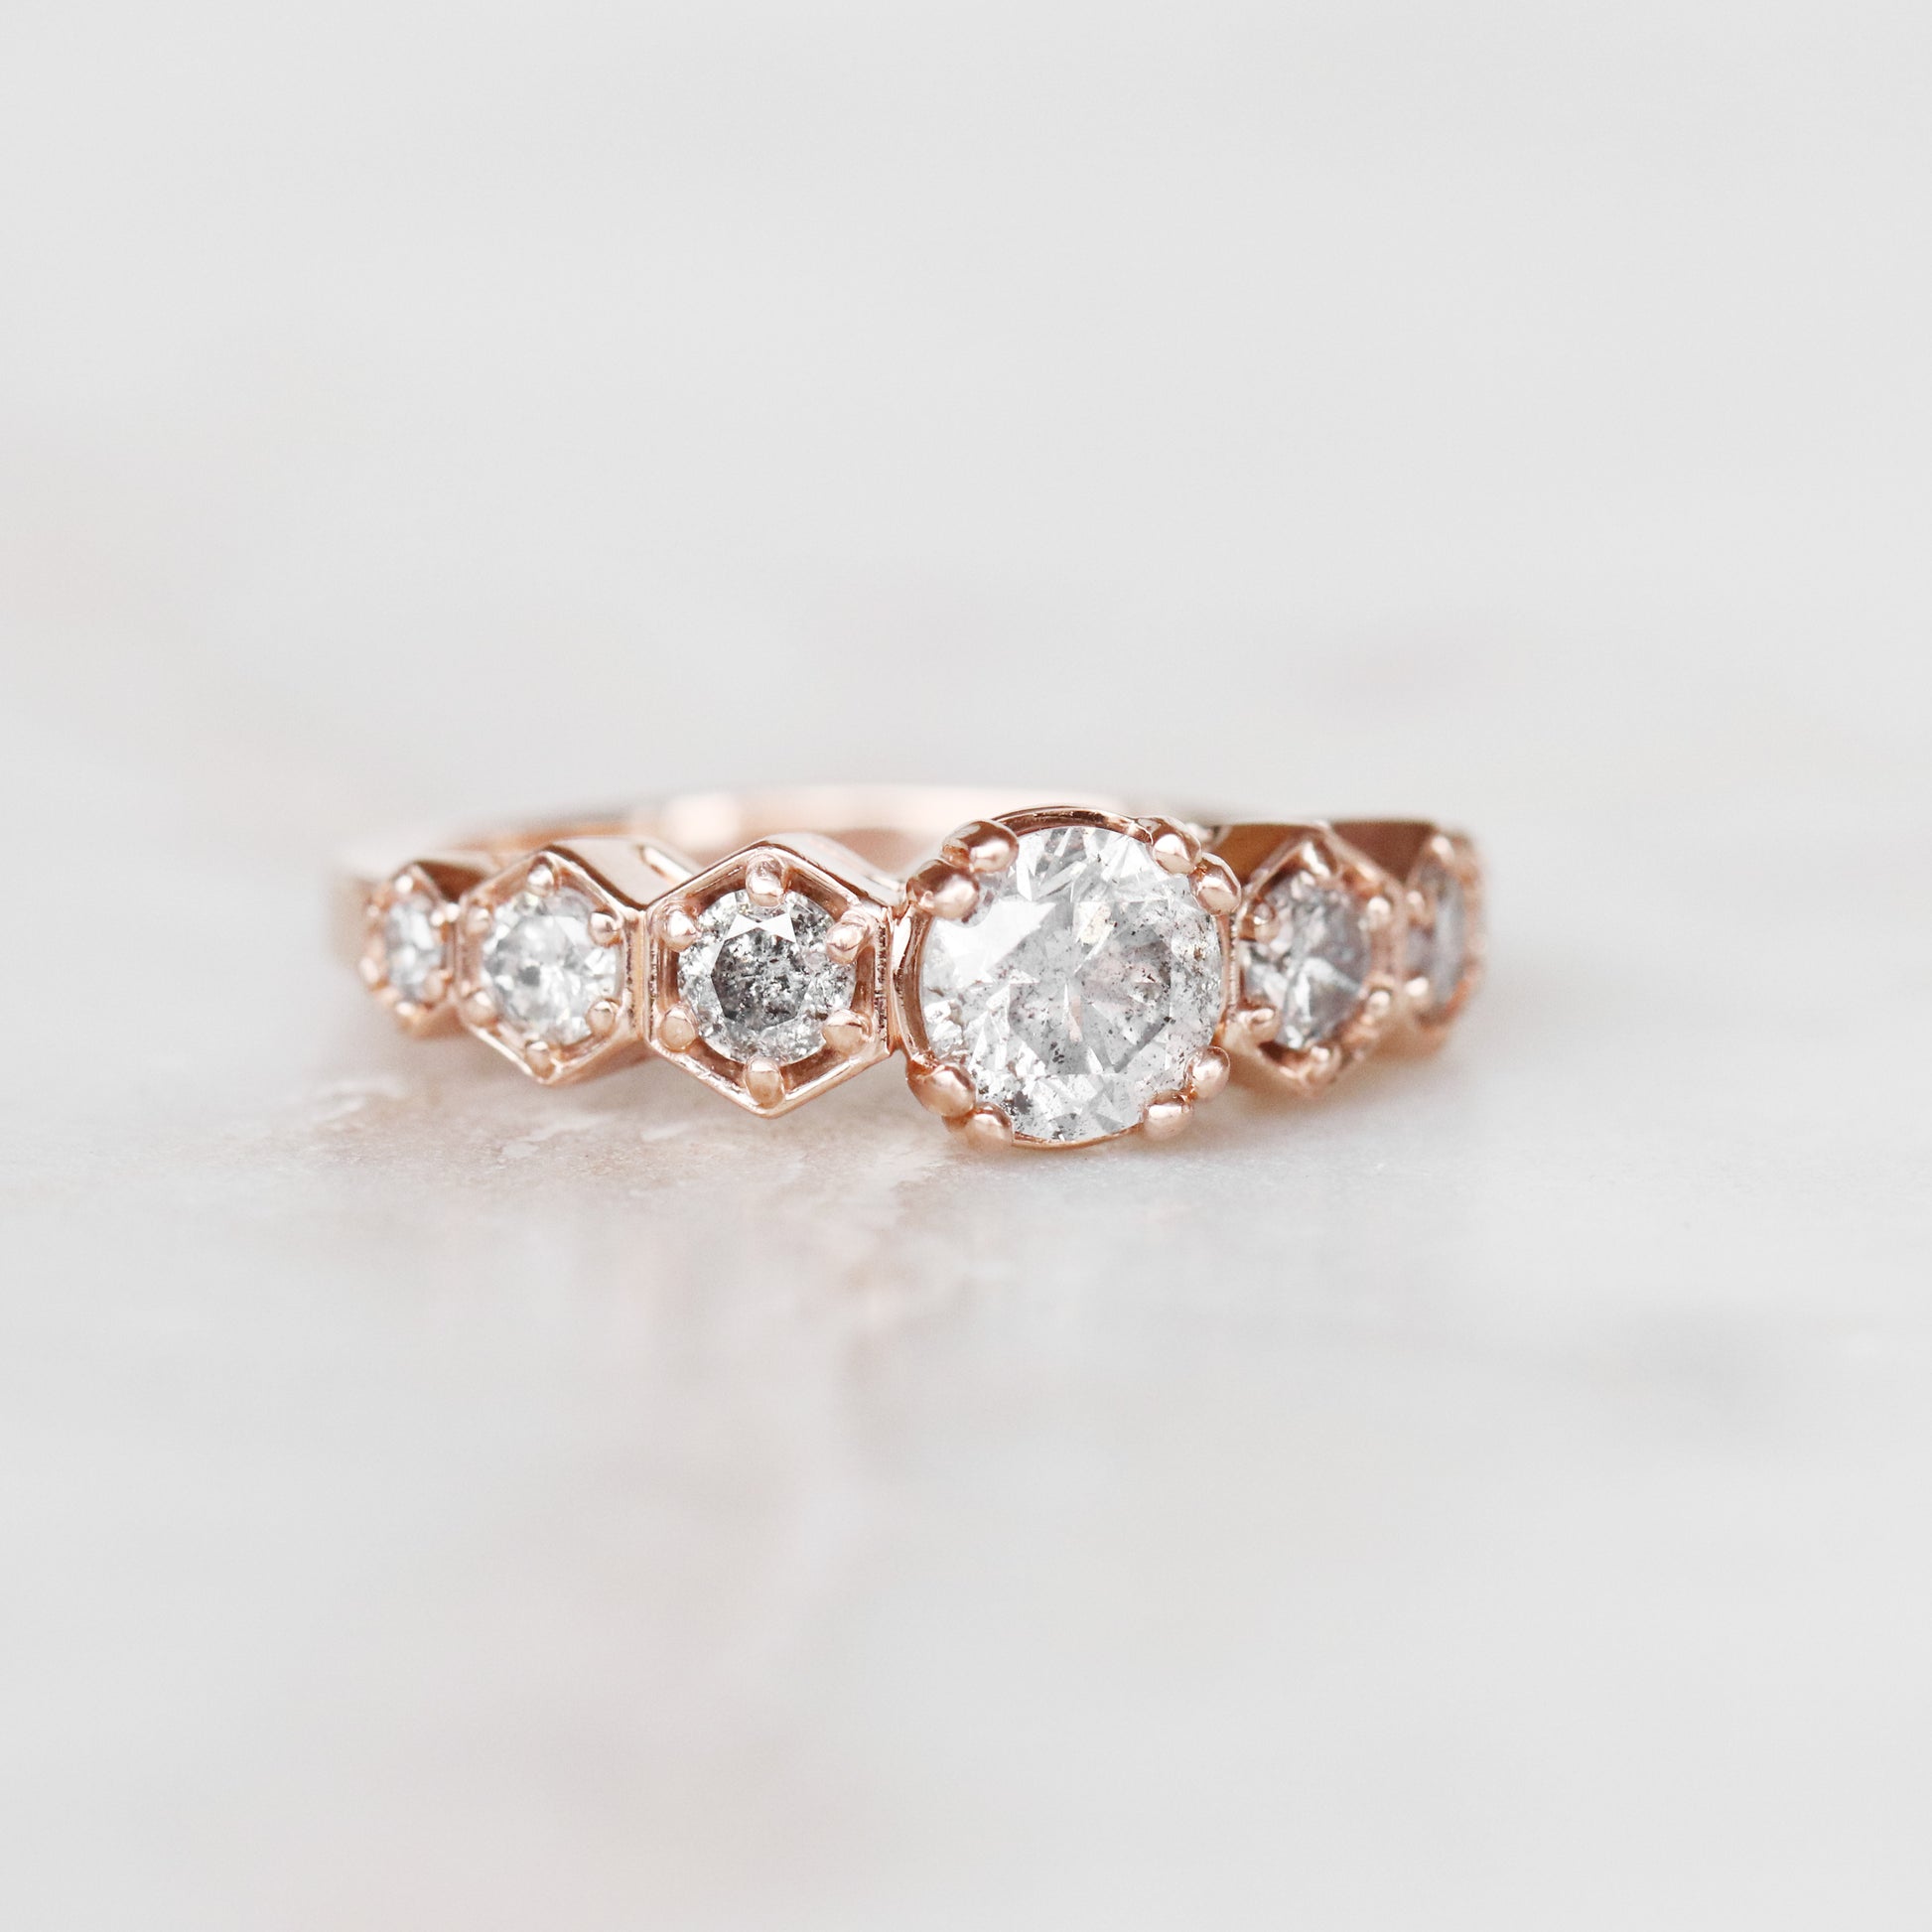 Wanda Ring with a .76 Carat Celestial Diamond and Accents in 14k Rose Gold - Ready to Size and Ship - Midwinter Co. Alternative Bridal Rings and Modern Fine Jewelry